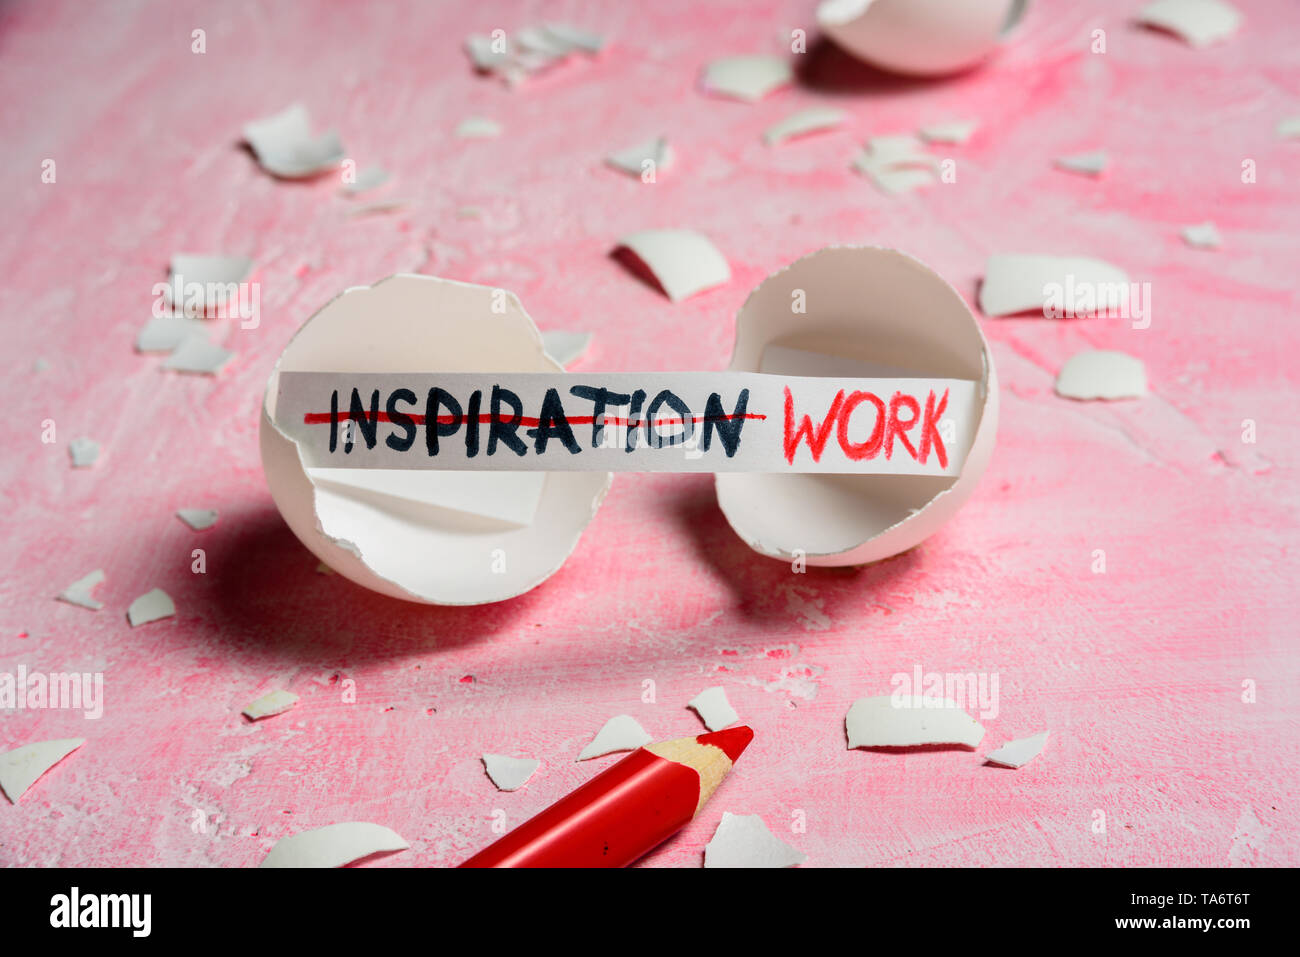 Work hard and inspiration concept. Cracked egg on pink background with text INSPIRATION and WORK. Like fortune cookies Stock Photo